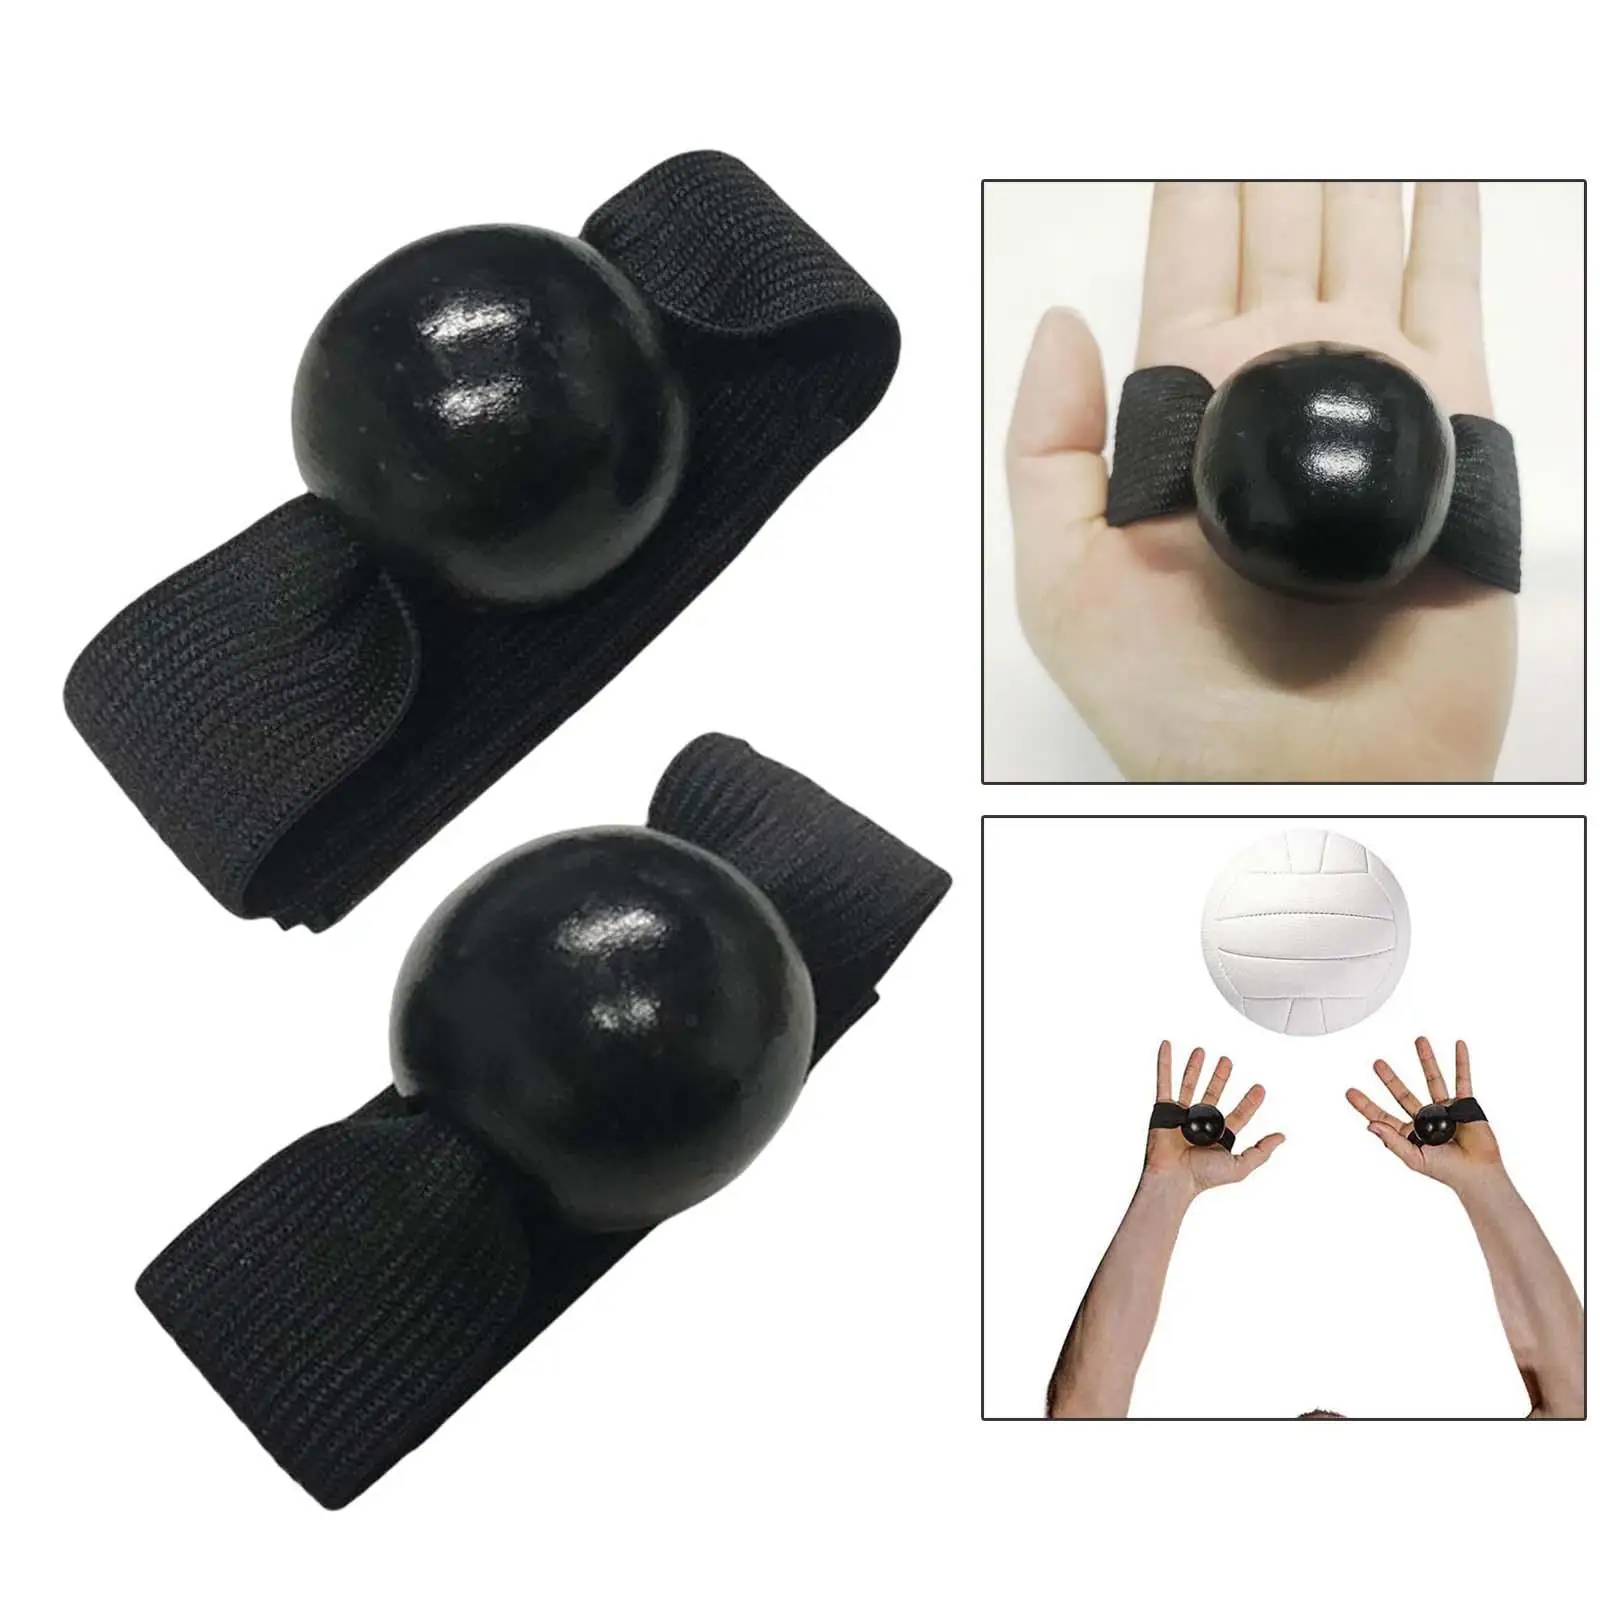 2x Volleyball Setting Drills Training Aid Assistant Setter Training Catching